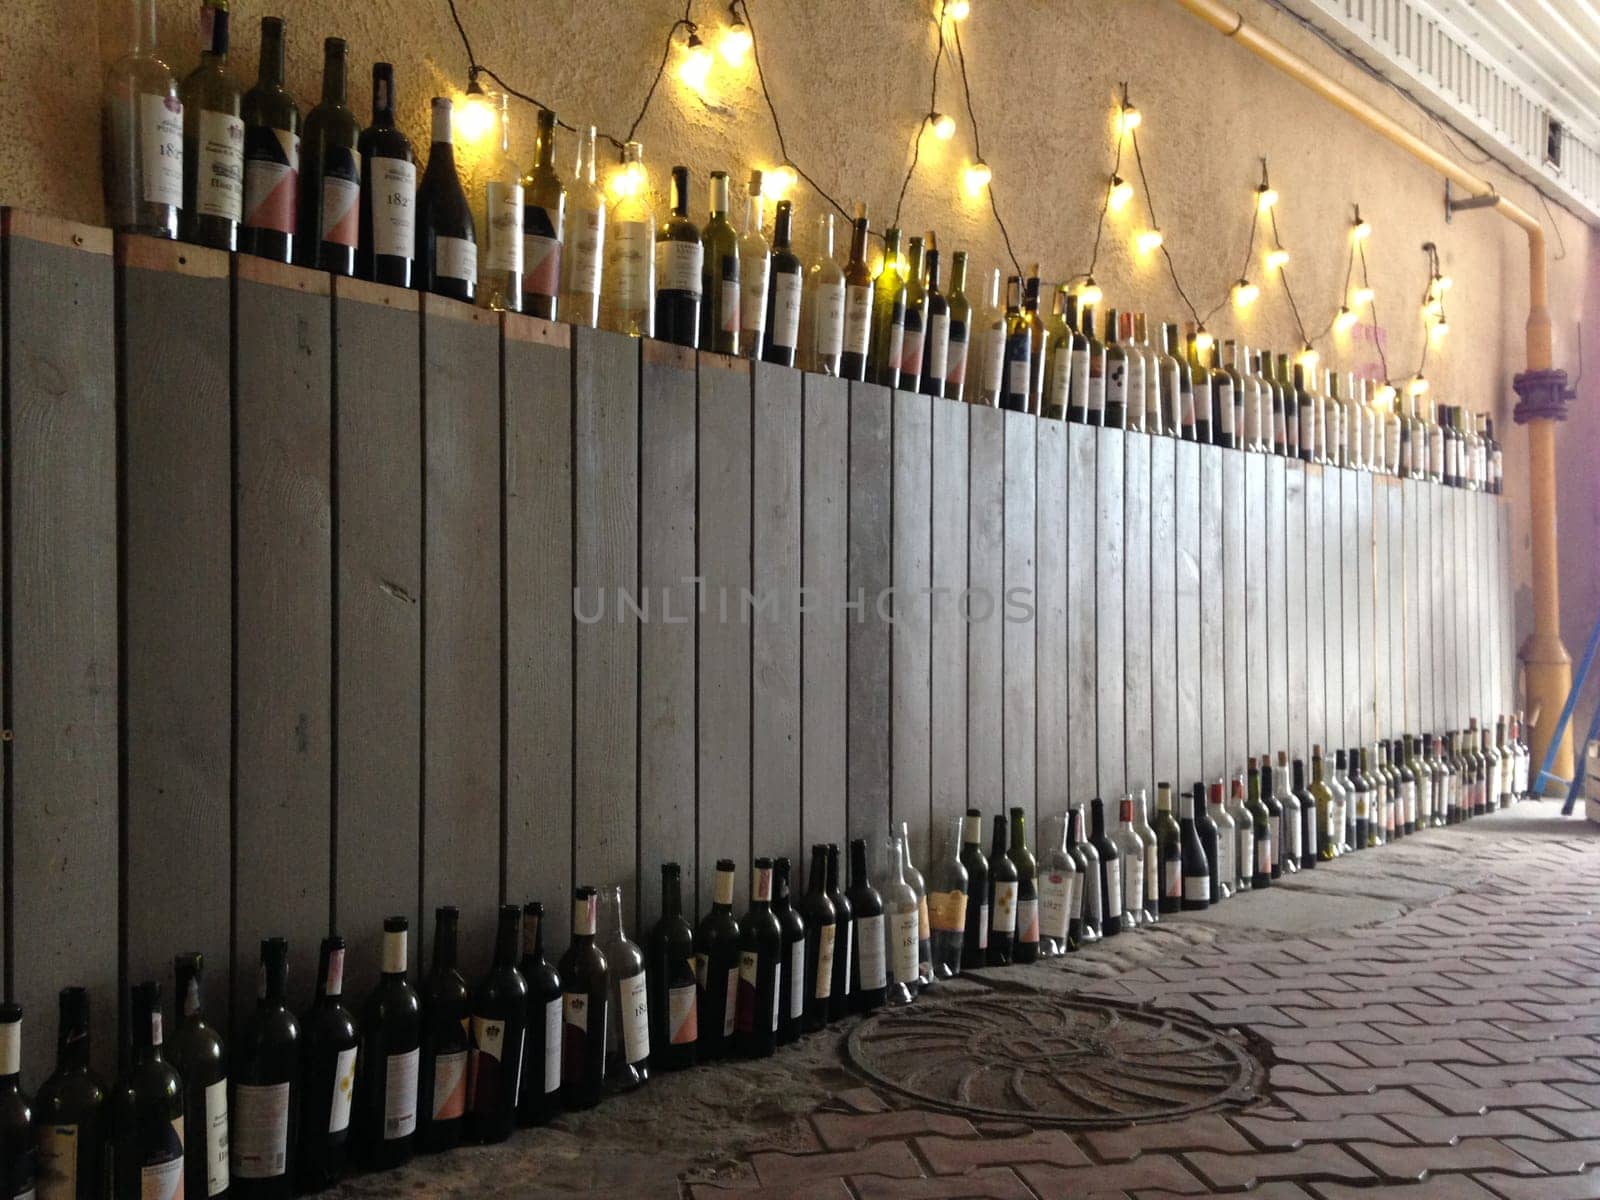 A lot of wine bottles standing under the wall. by Maksym